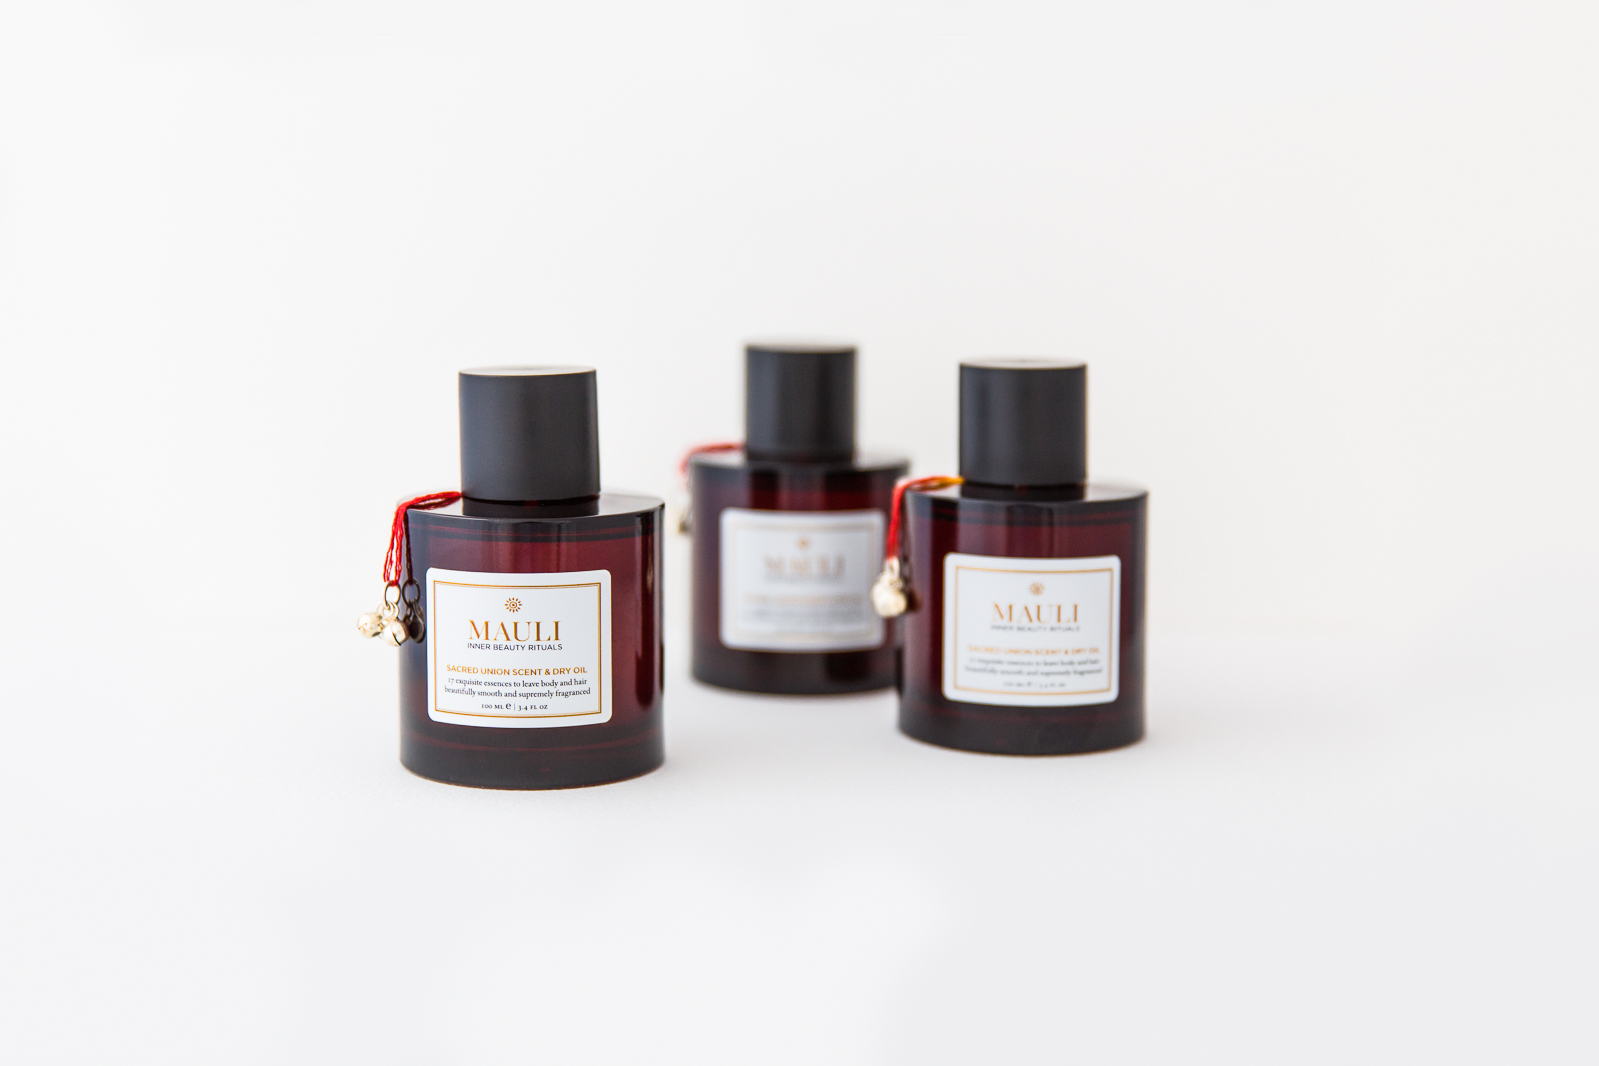 MAULI SACRED UNION SCENT DRY OIL lovely packagings